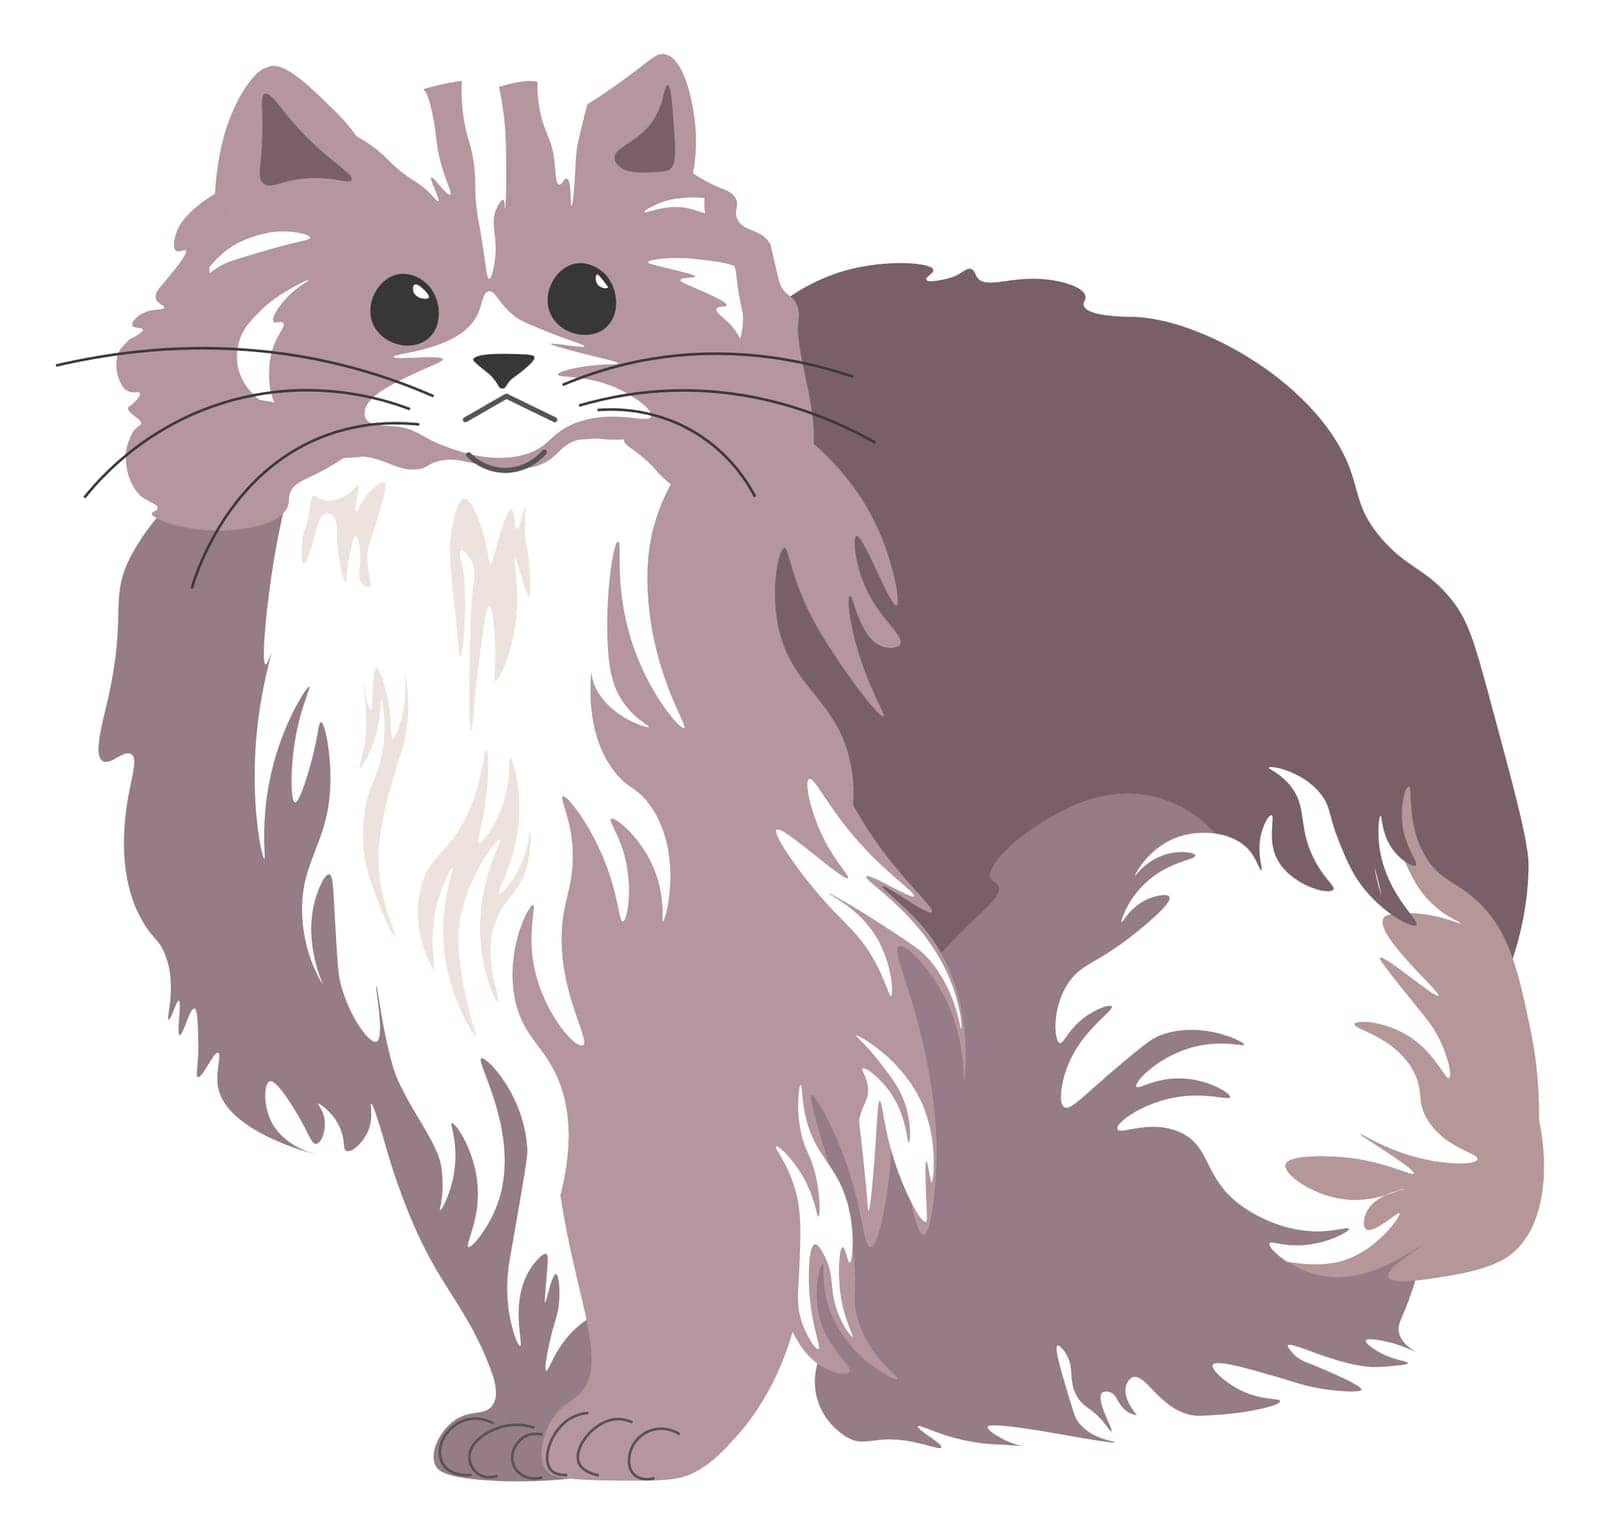 Portrait of furry kitten with long whiskers and hair. isolated cat of purebred, feline animal domestic pet looking with curiosity and sitting still. Funny muzzle of kitty. Vector in flat style